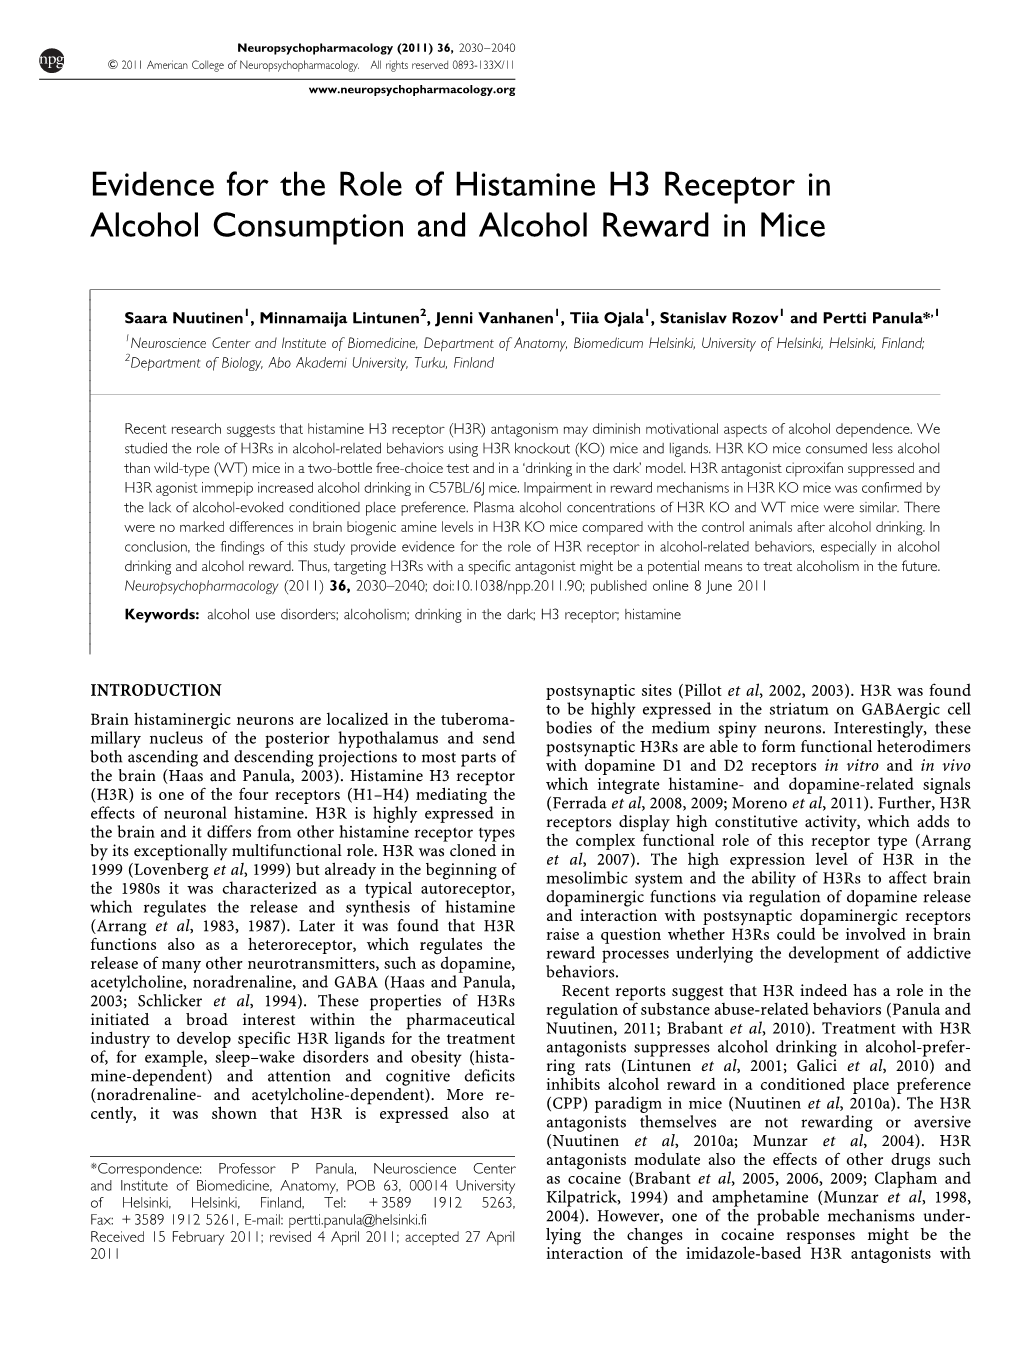 Evidence for the Role of Histamine H3 Receptor in Alcohol Consumption and Alcohol Reward in Mice